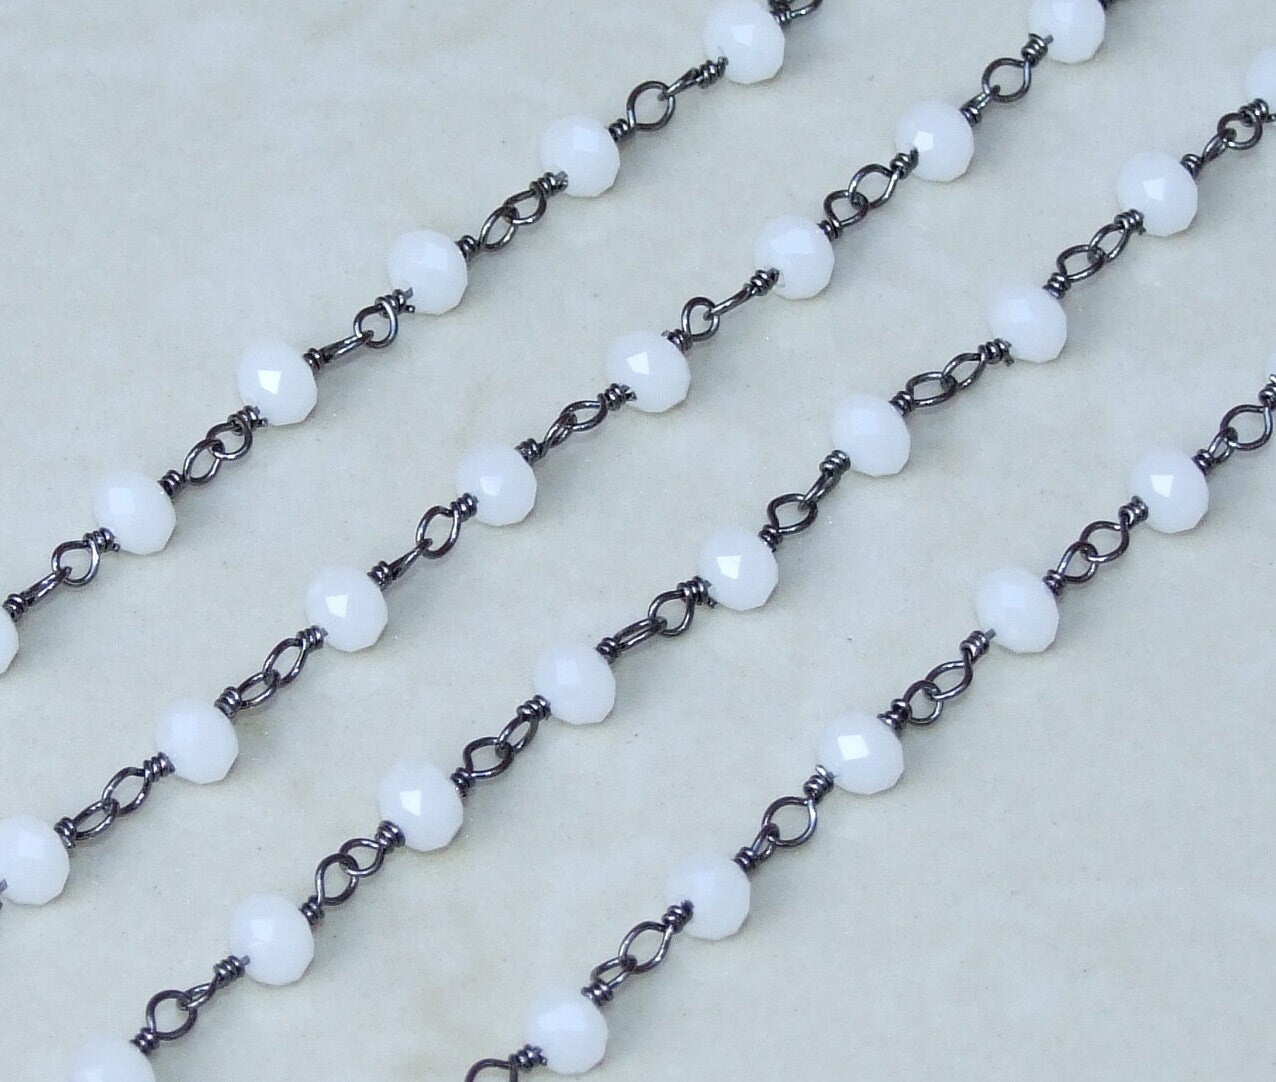 White Glass Rosary Chain, Bulk Chain, Rondelle Glass Beads, Beaded Chain, Body Chain Jewelry, Gunmetal Chain, Necklace Chain, Belly Chain 